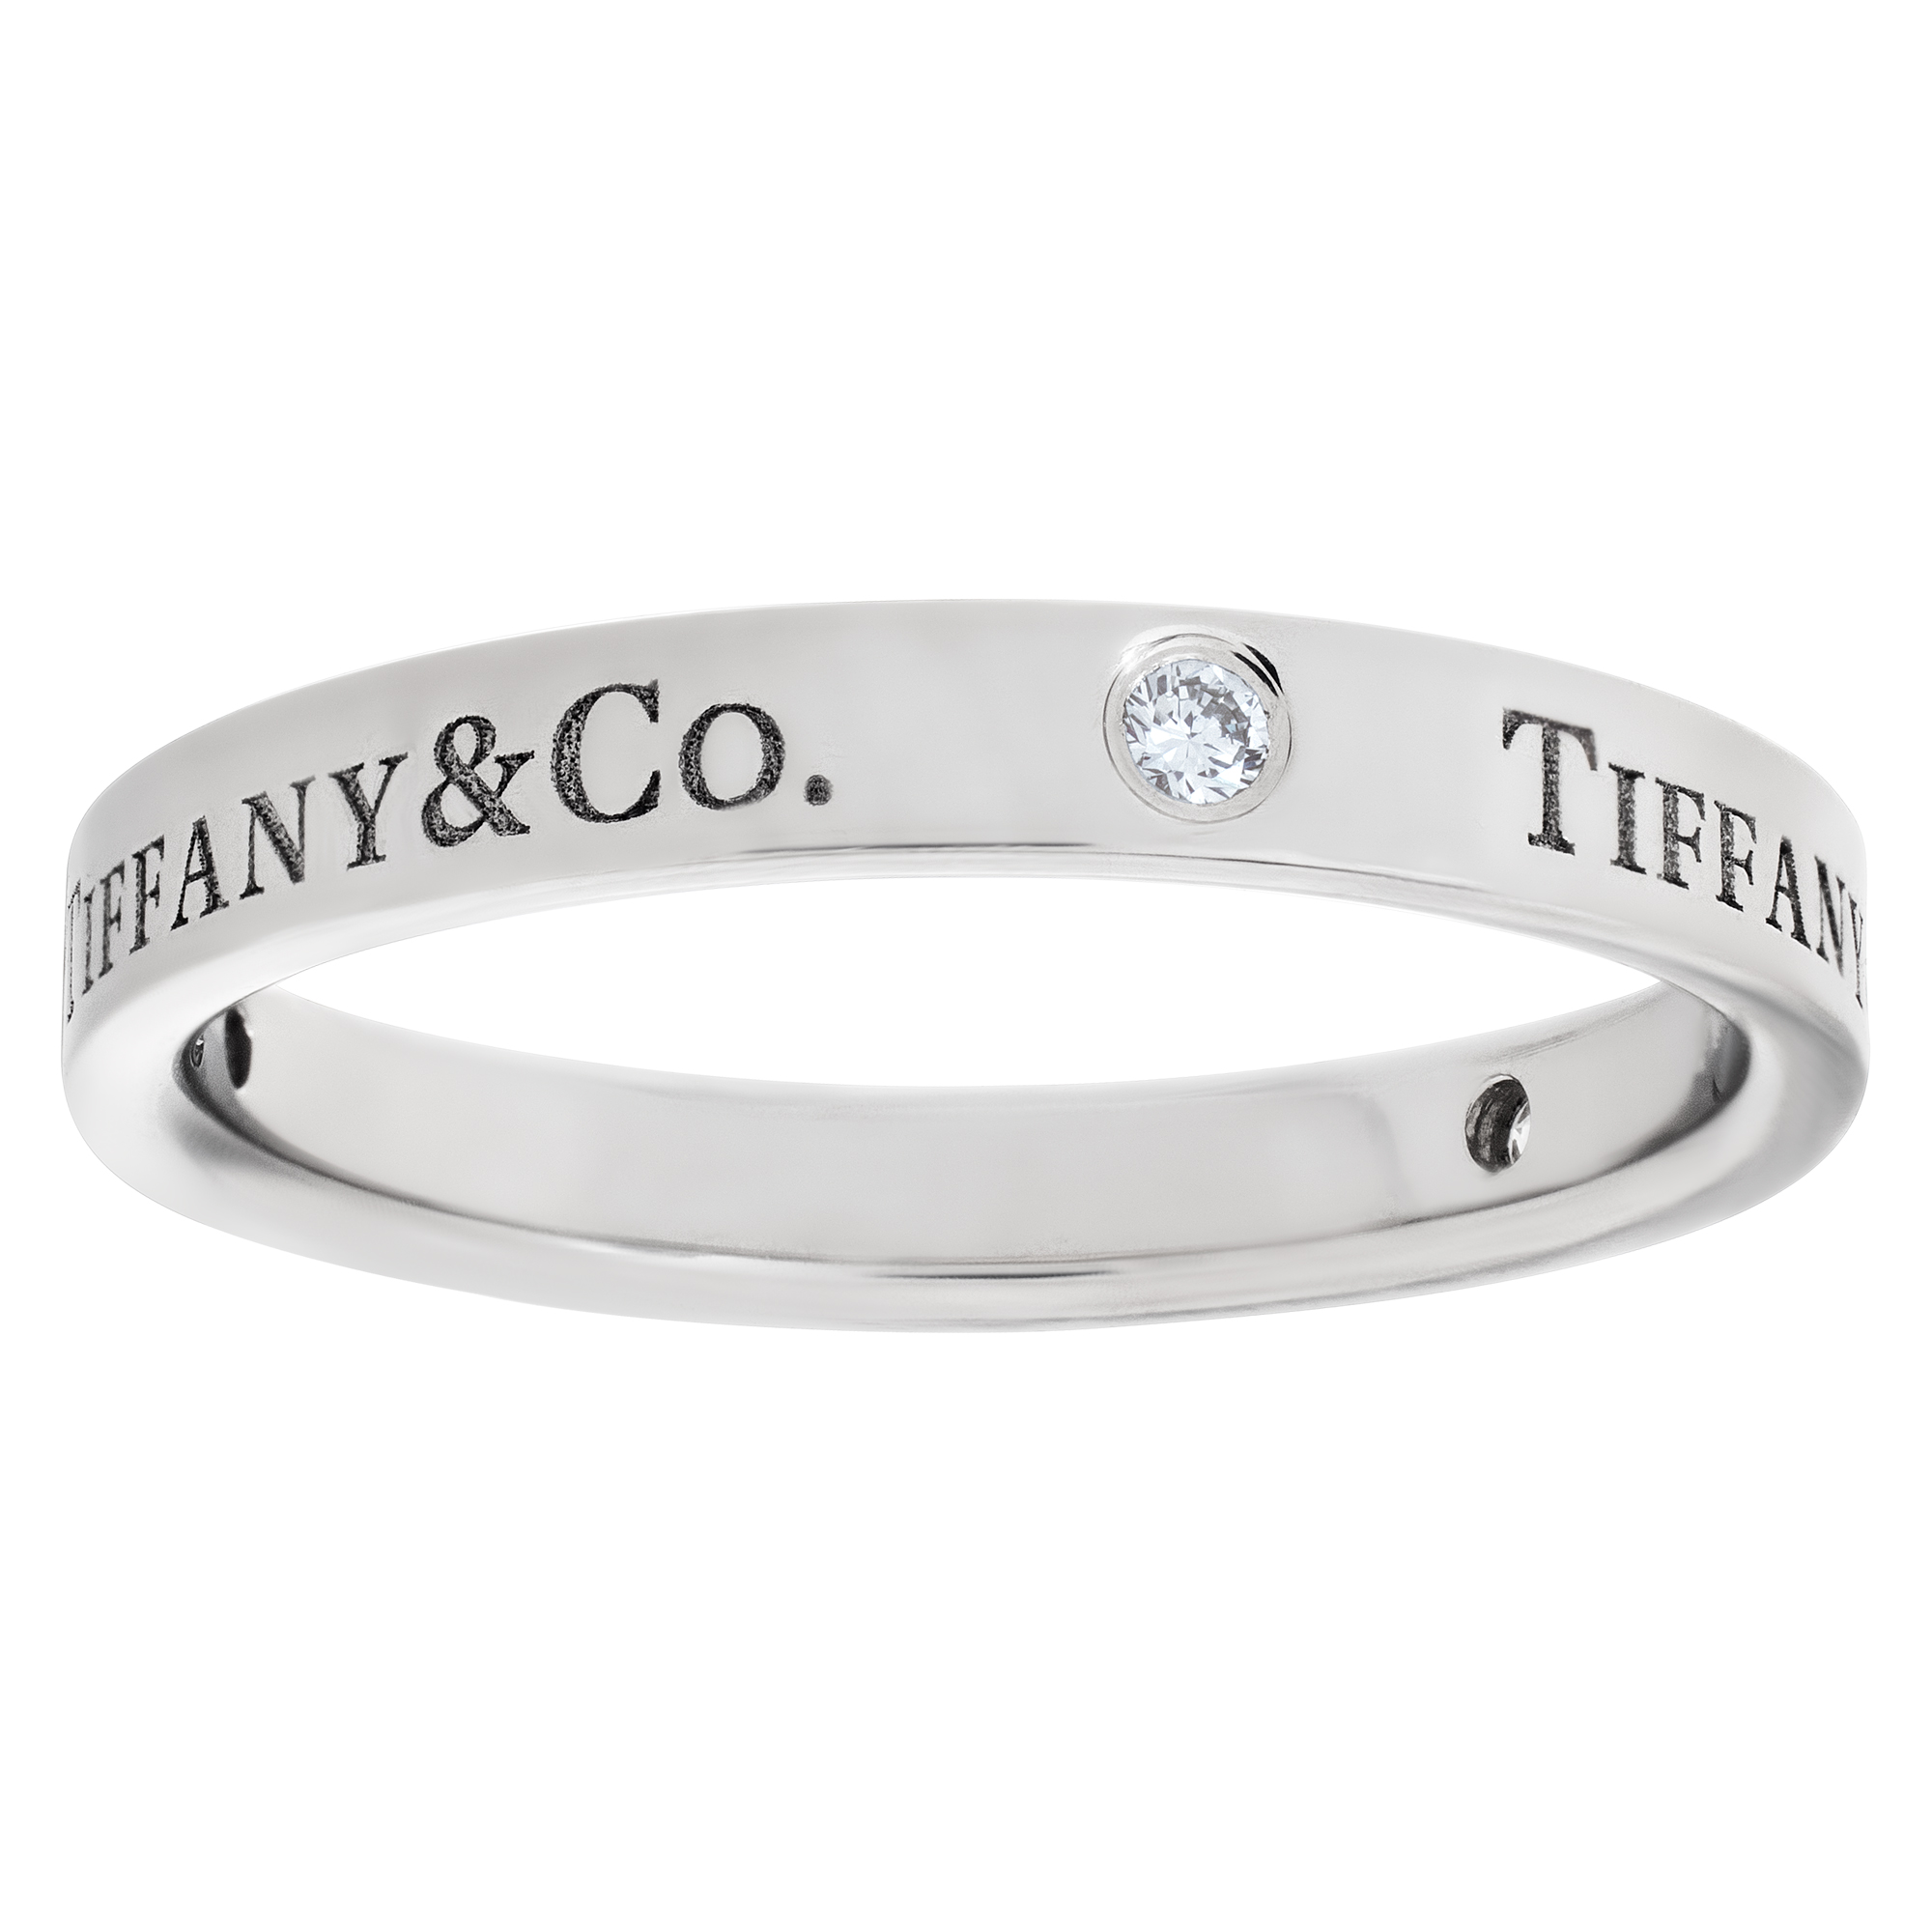 Tiffany & Co. band ring in platinum with 3 diamonds image 1